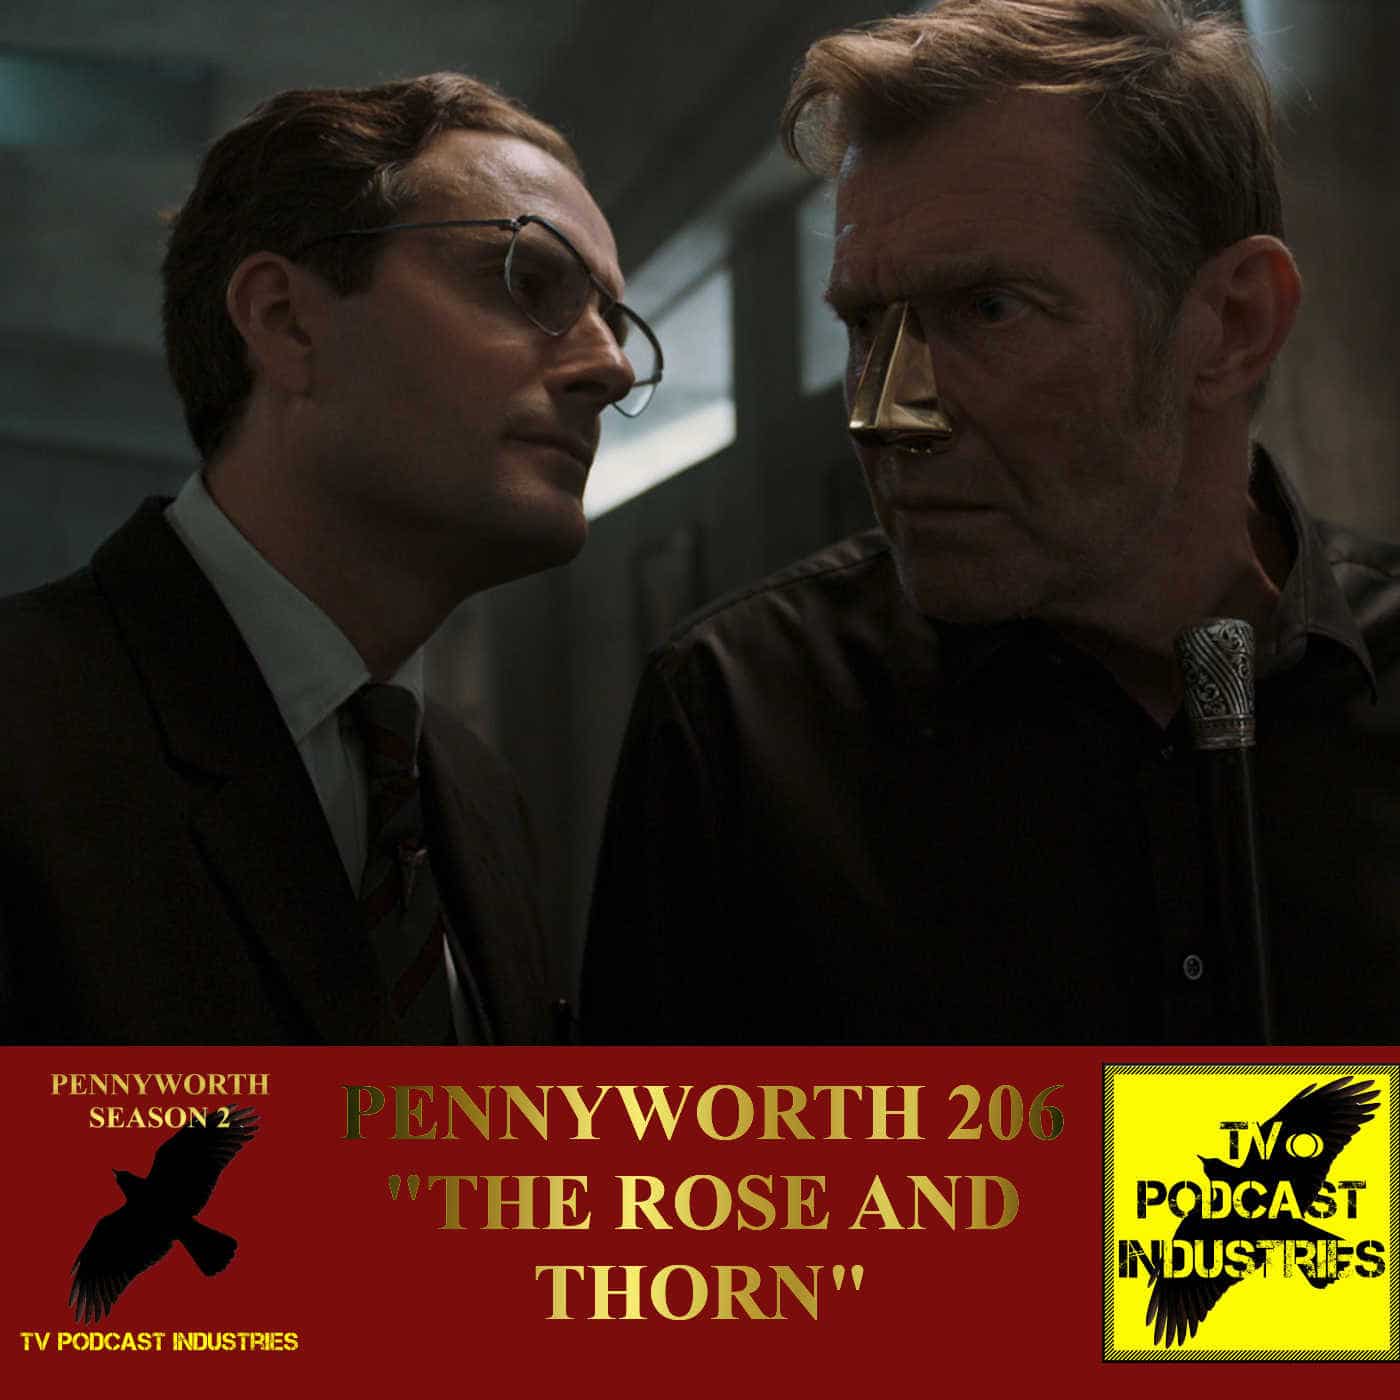 Pennyworth Season 2 Episode 6 "The Rose And Thorn" Podcast by TV Podcast Industries